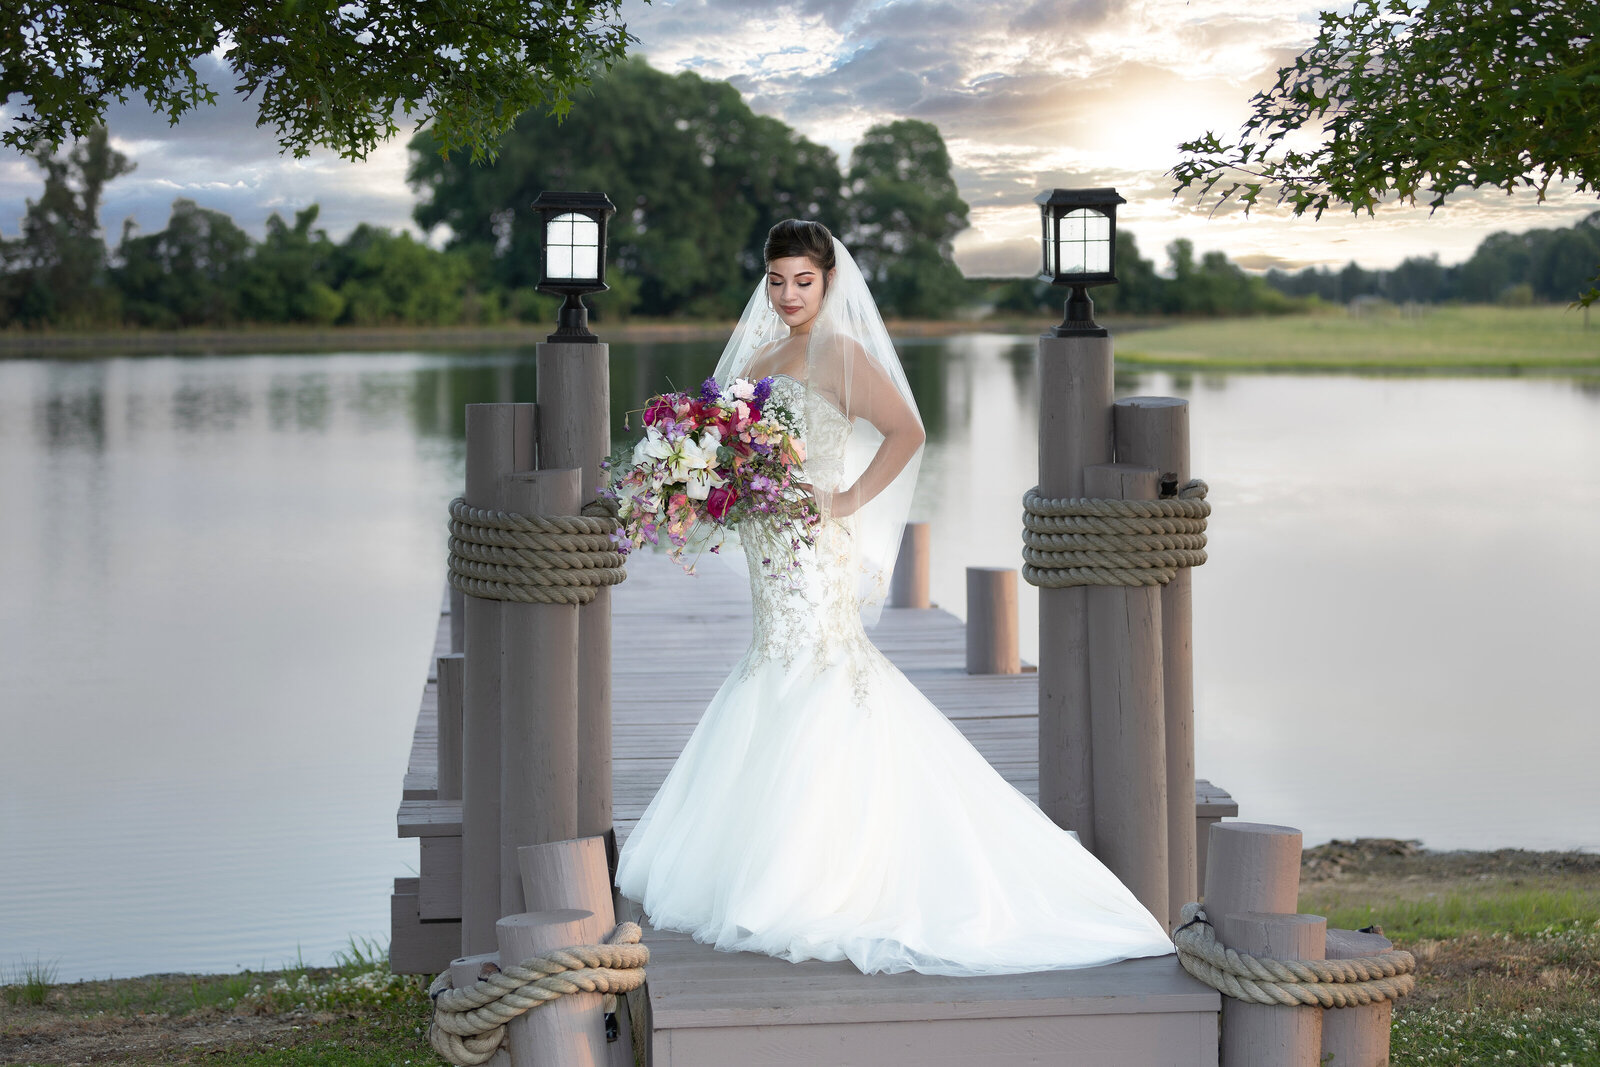 wedding photography packages, wedding photographer in charlotte, best weddding photography charlotte nc